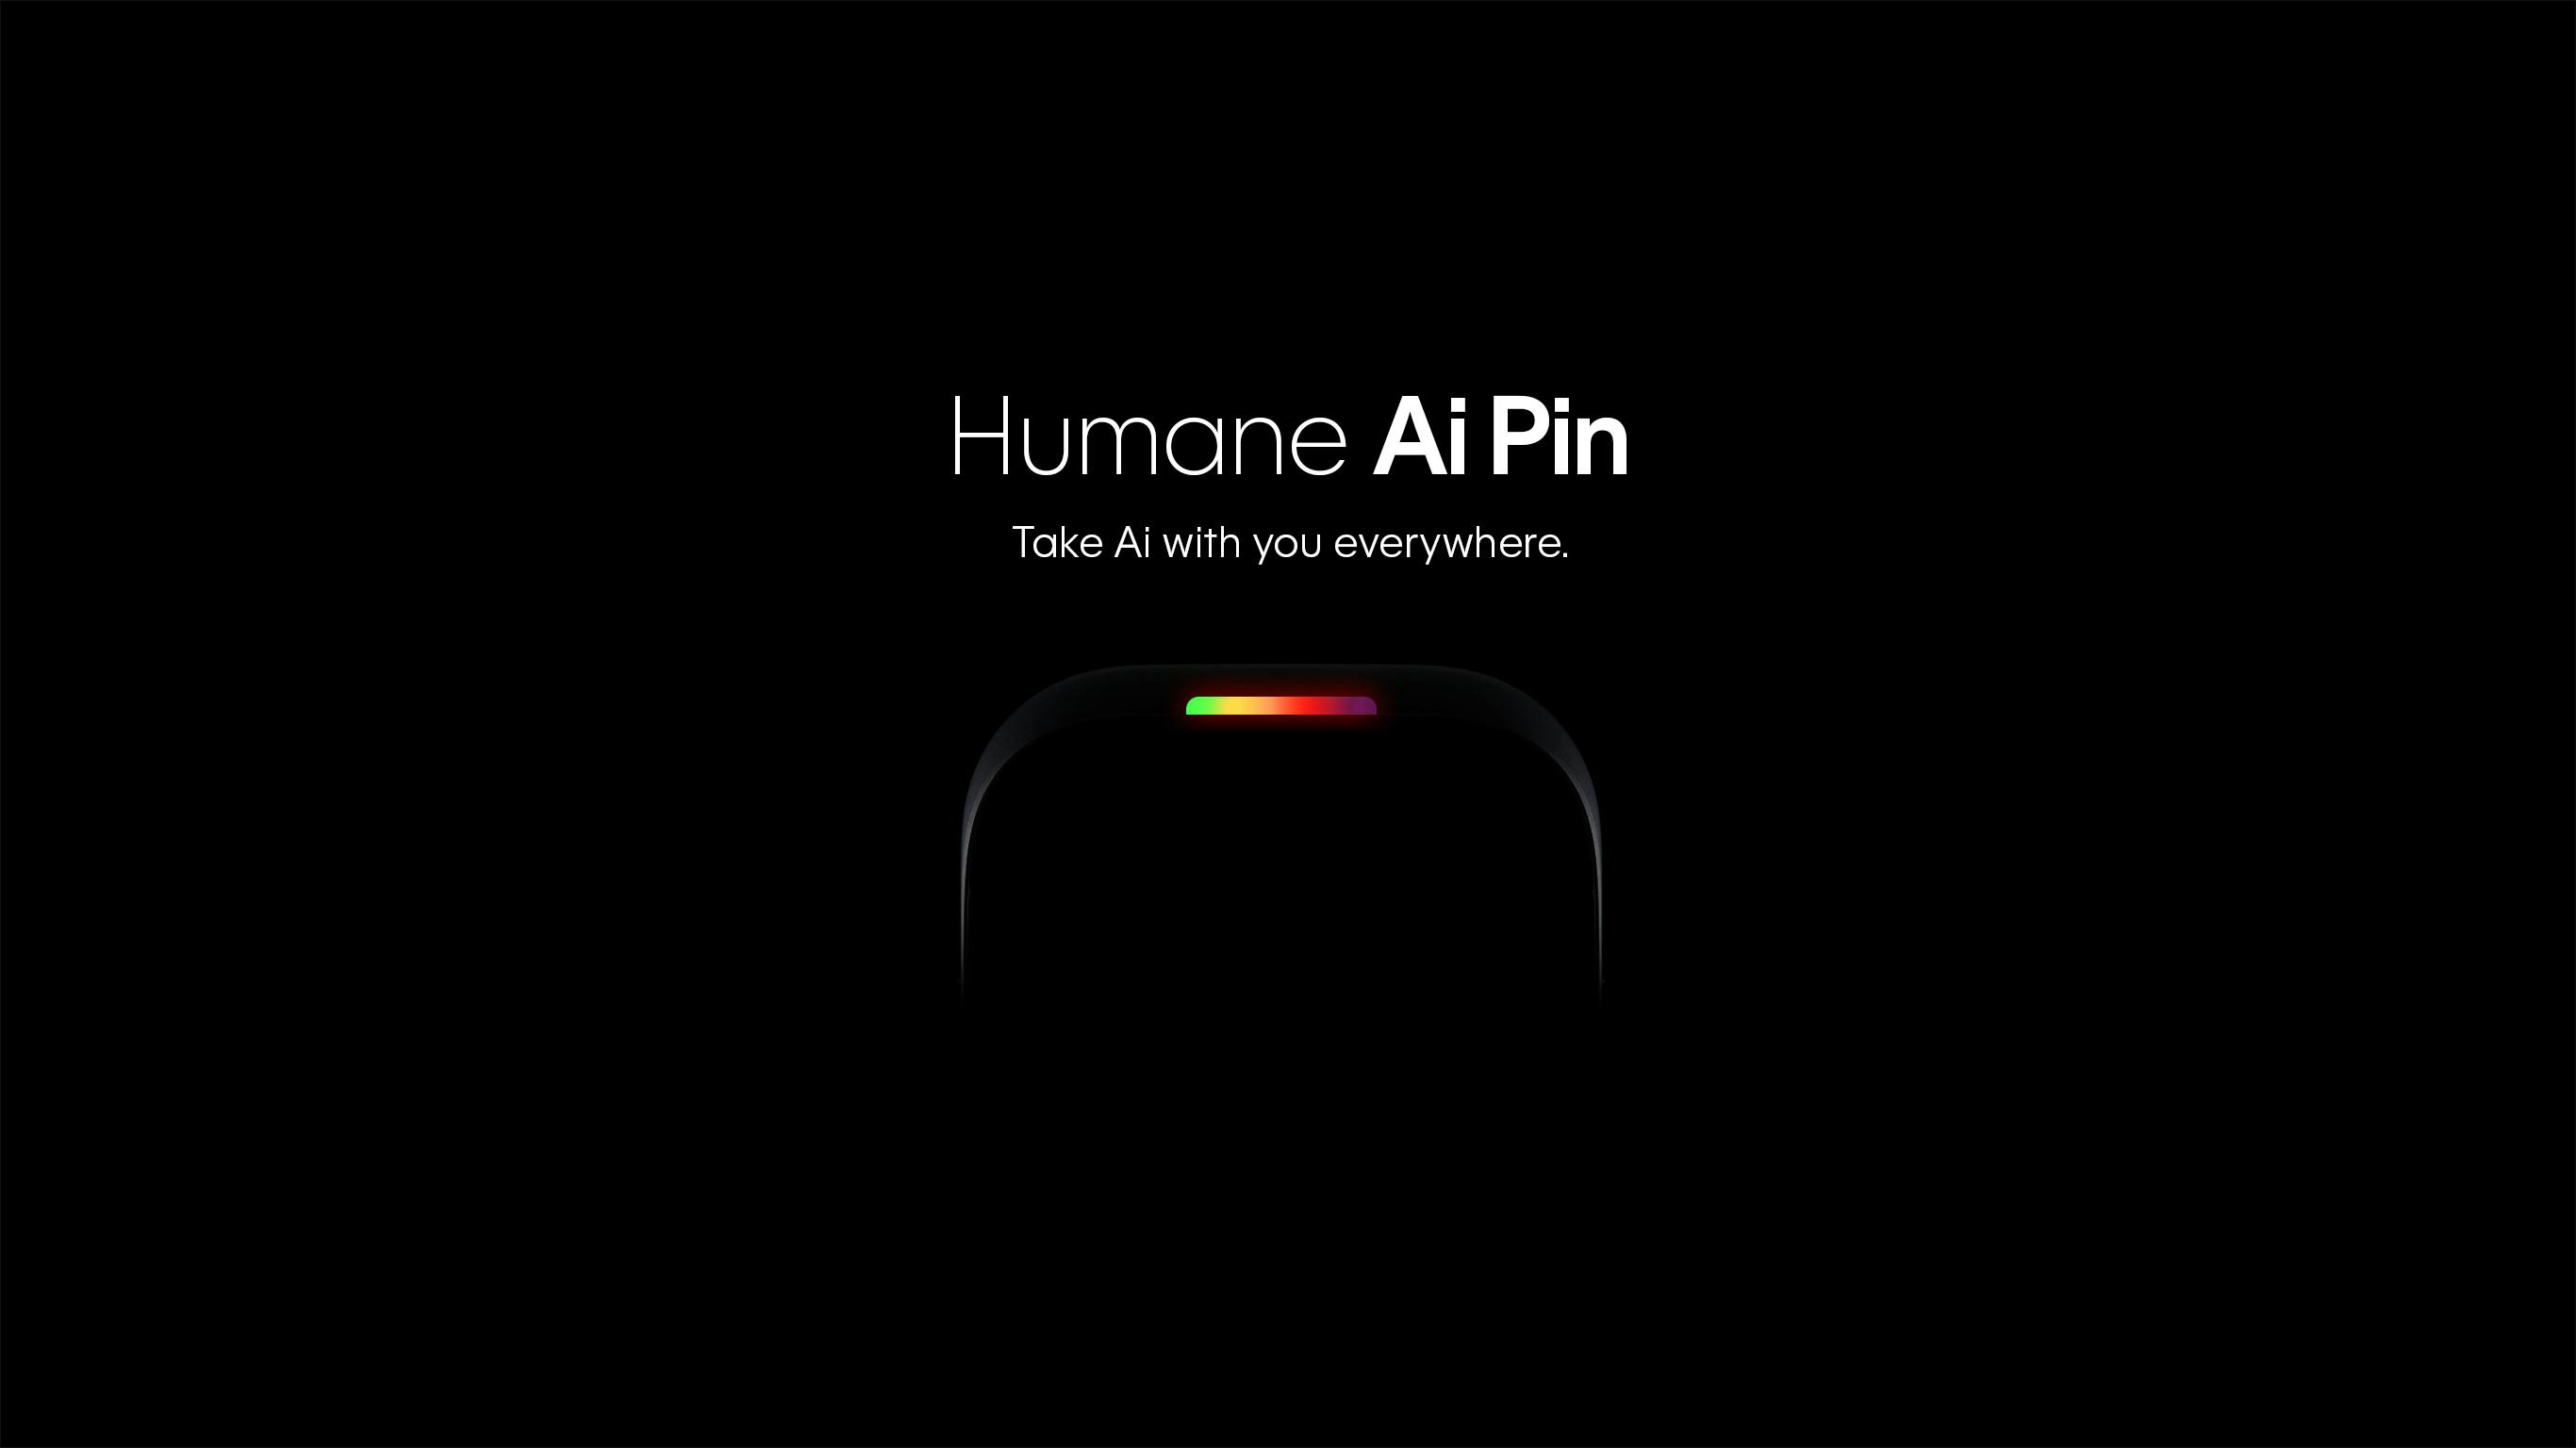 Humane reveals the name of first device, the Humane Ai Pin.